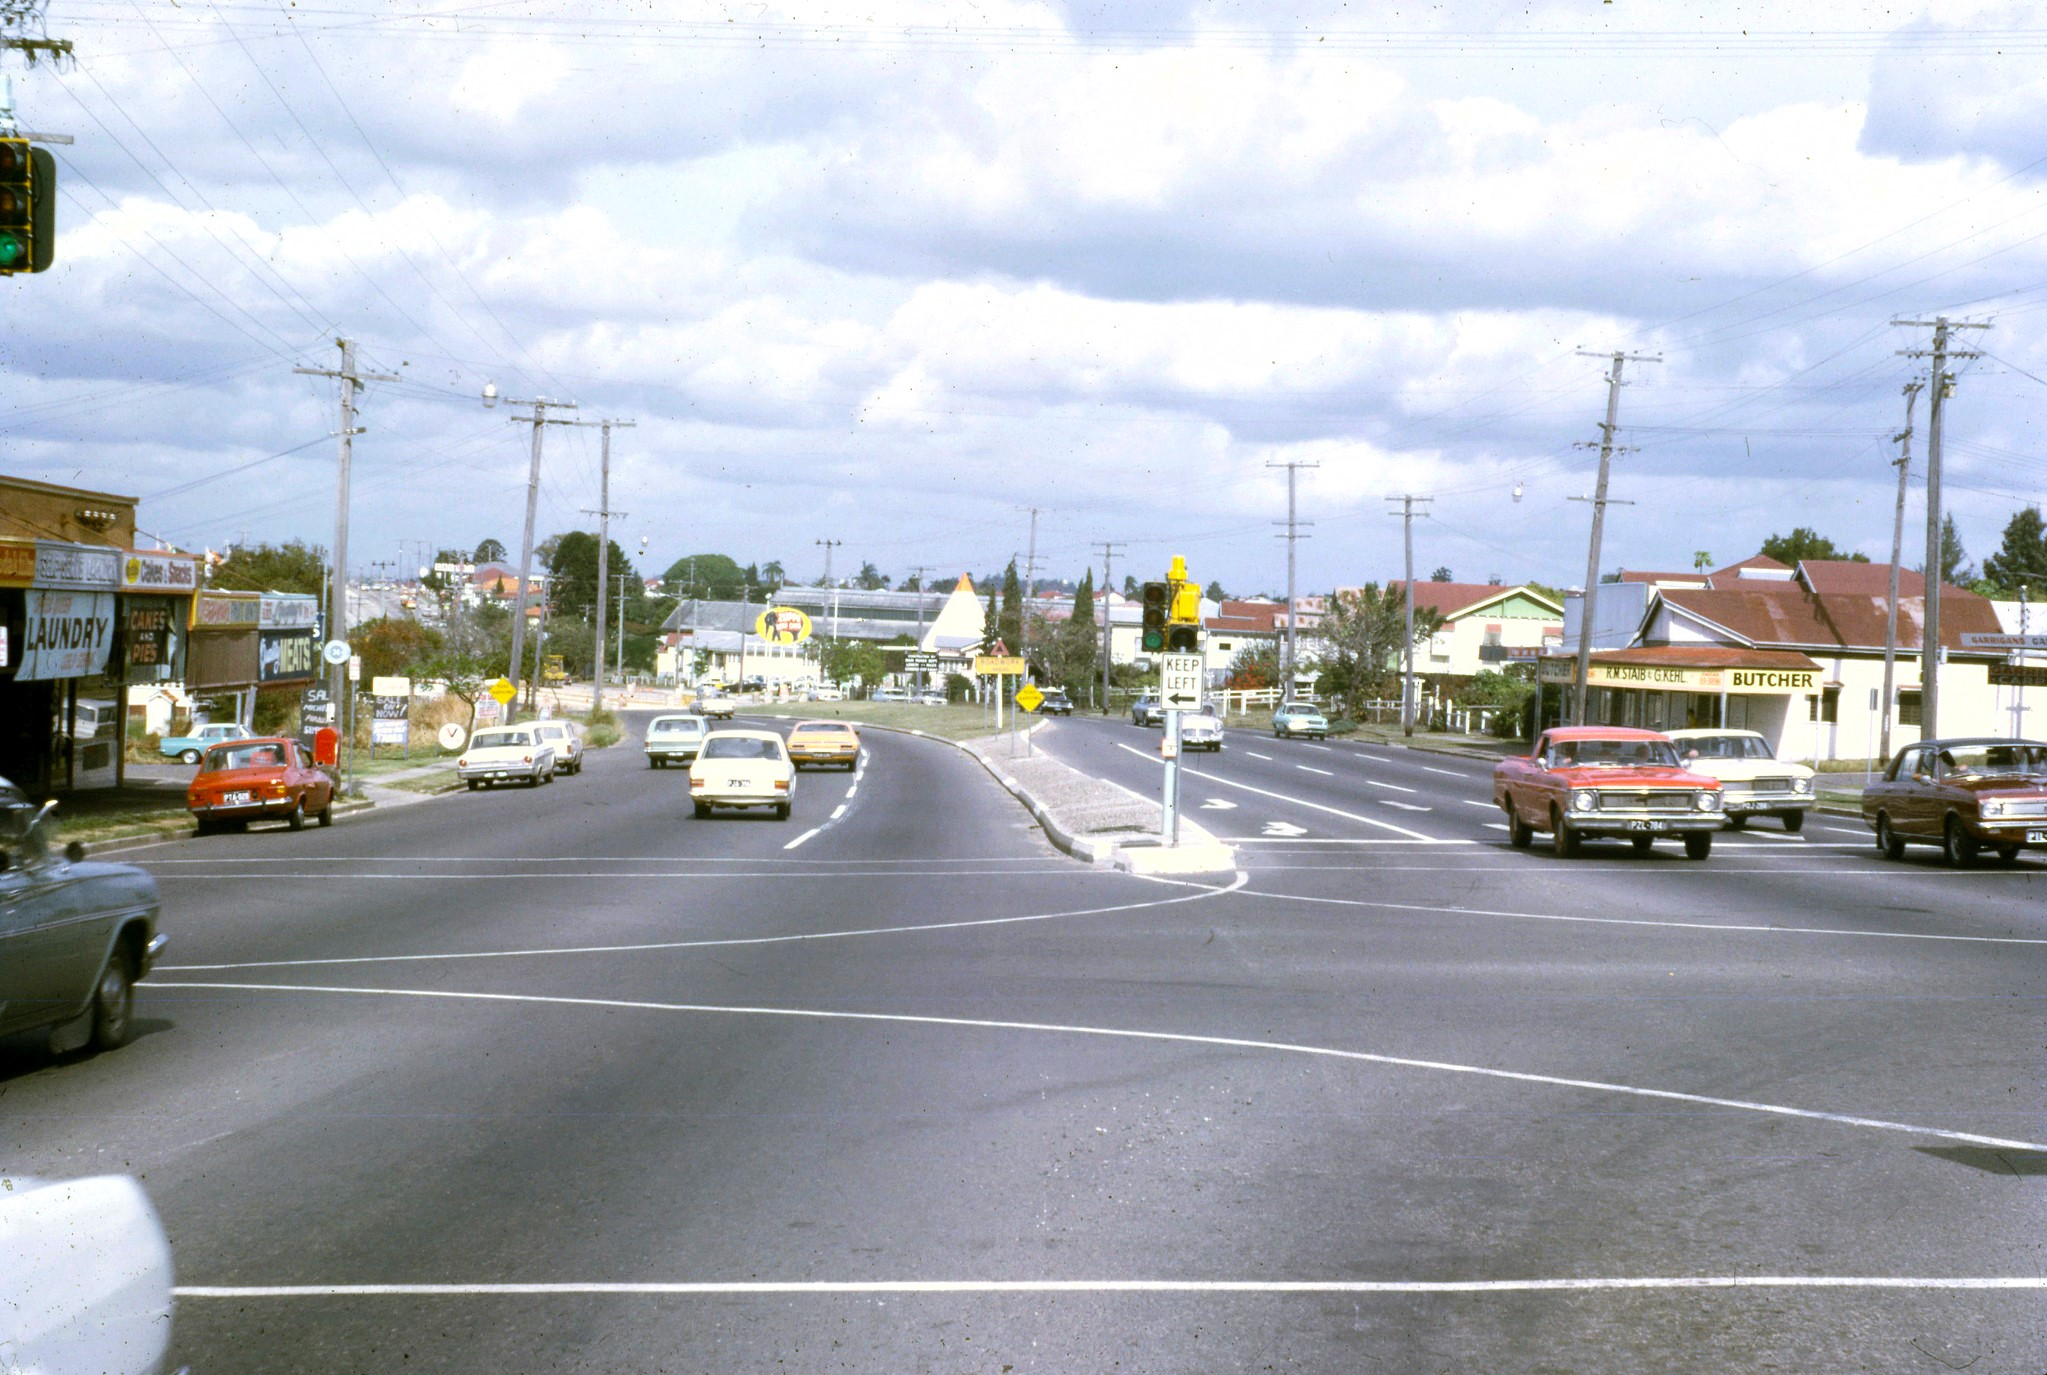 A photo of an intersection on a wide road with old-timey cars driving on the left. In the distance the road curves to the left and follows up a hill.